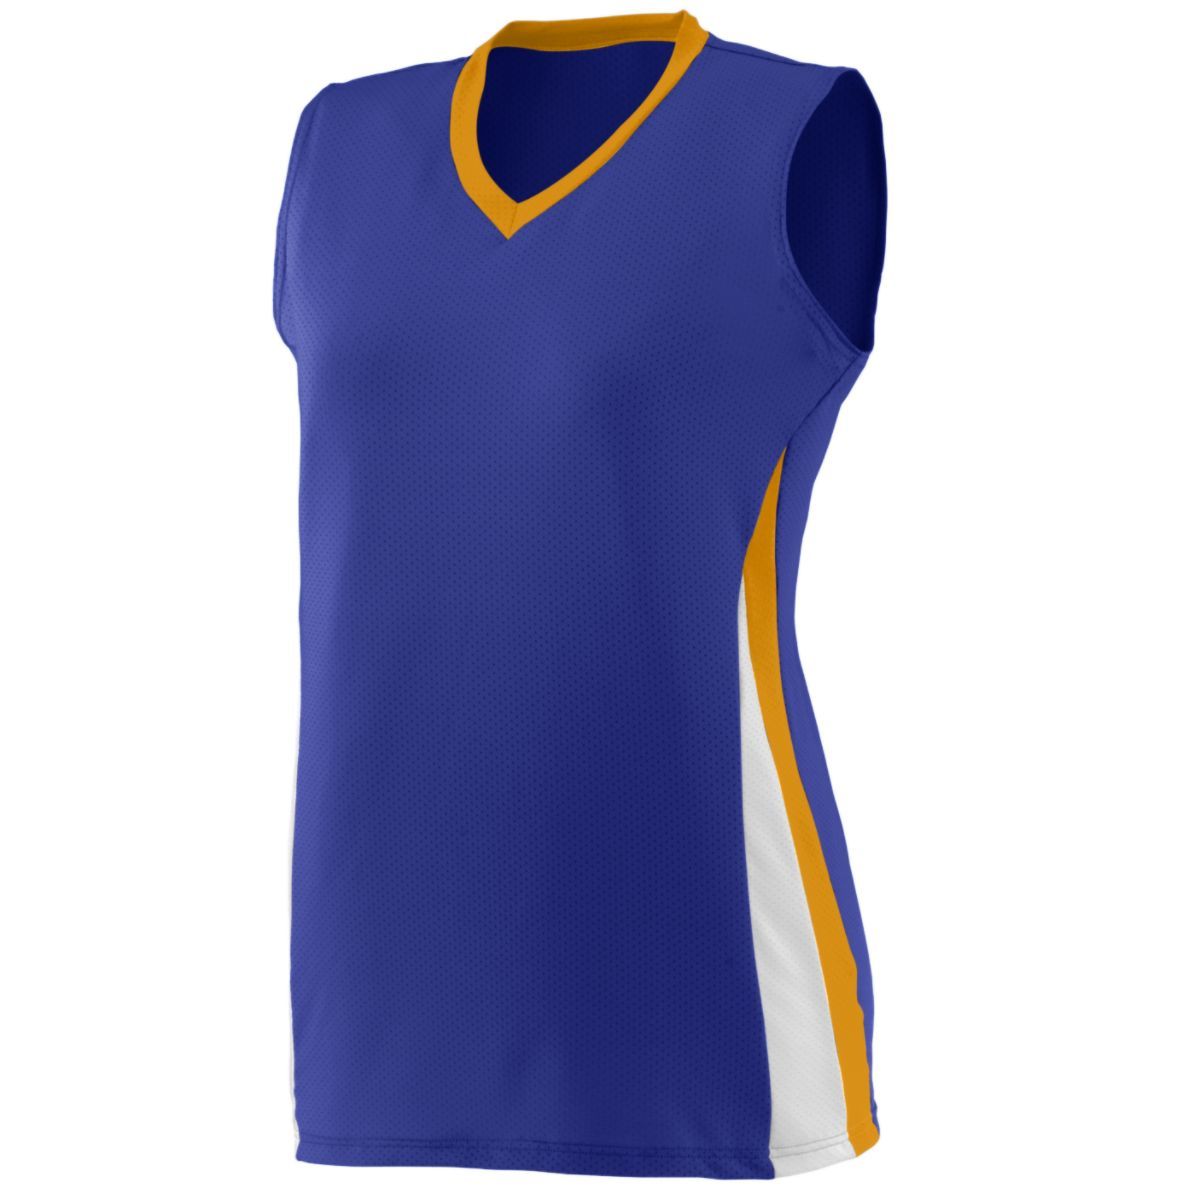 Augusta Sportswear Ladies Tornado Jersey in Purple/Gold/White  -Part of the Ladies, Ladies-Jersey, Augusta-Products, Volleyball, Shirts product lines at KanaleyCreations.com